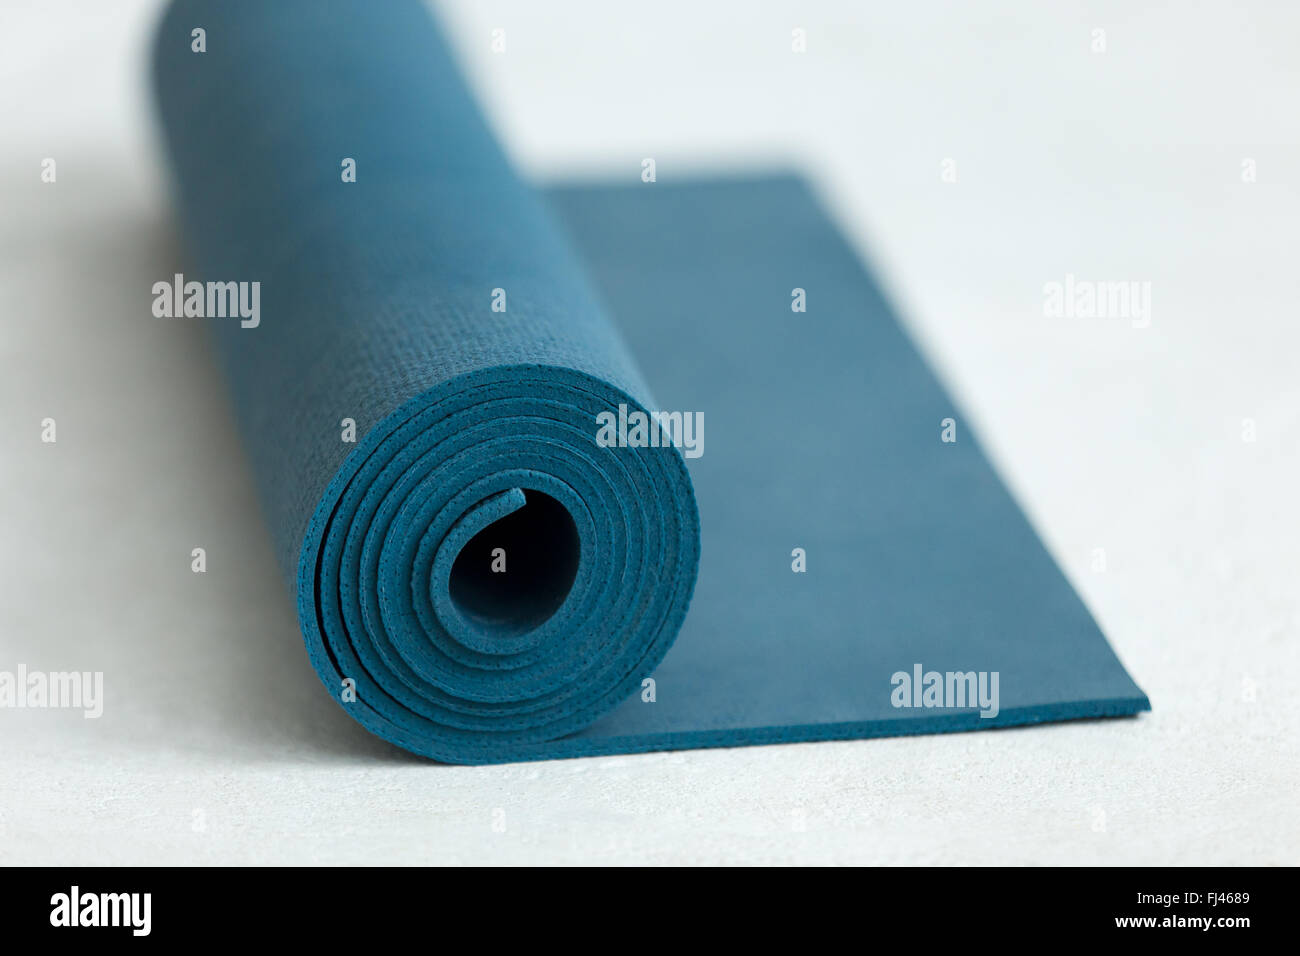 Rolled up blue yoga, pilates or exercise mat on the floor, close up Stock Photo